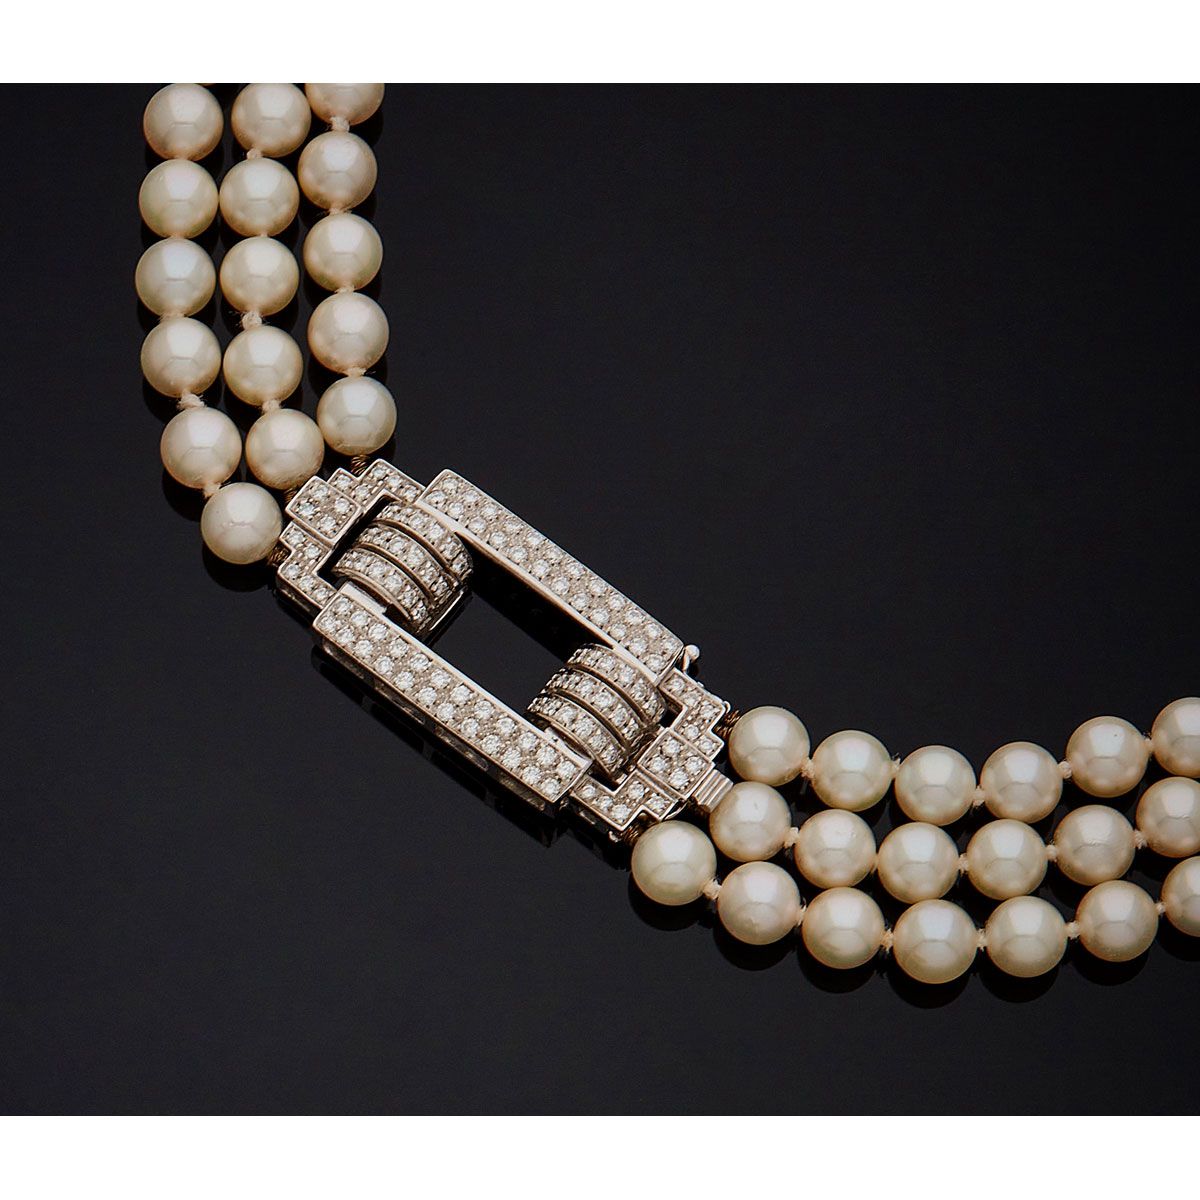 Null Necklace composed of three rows of cultured pearls, mounted on wires, adorn&hellip;